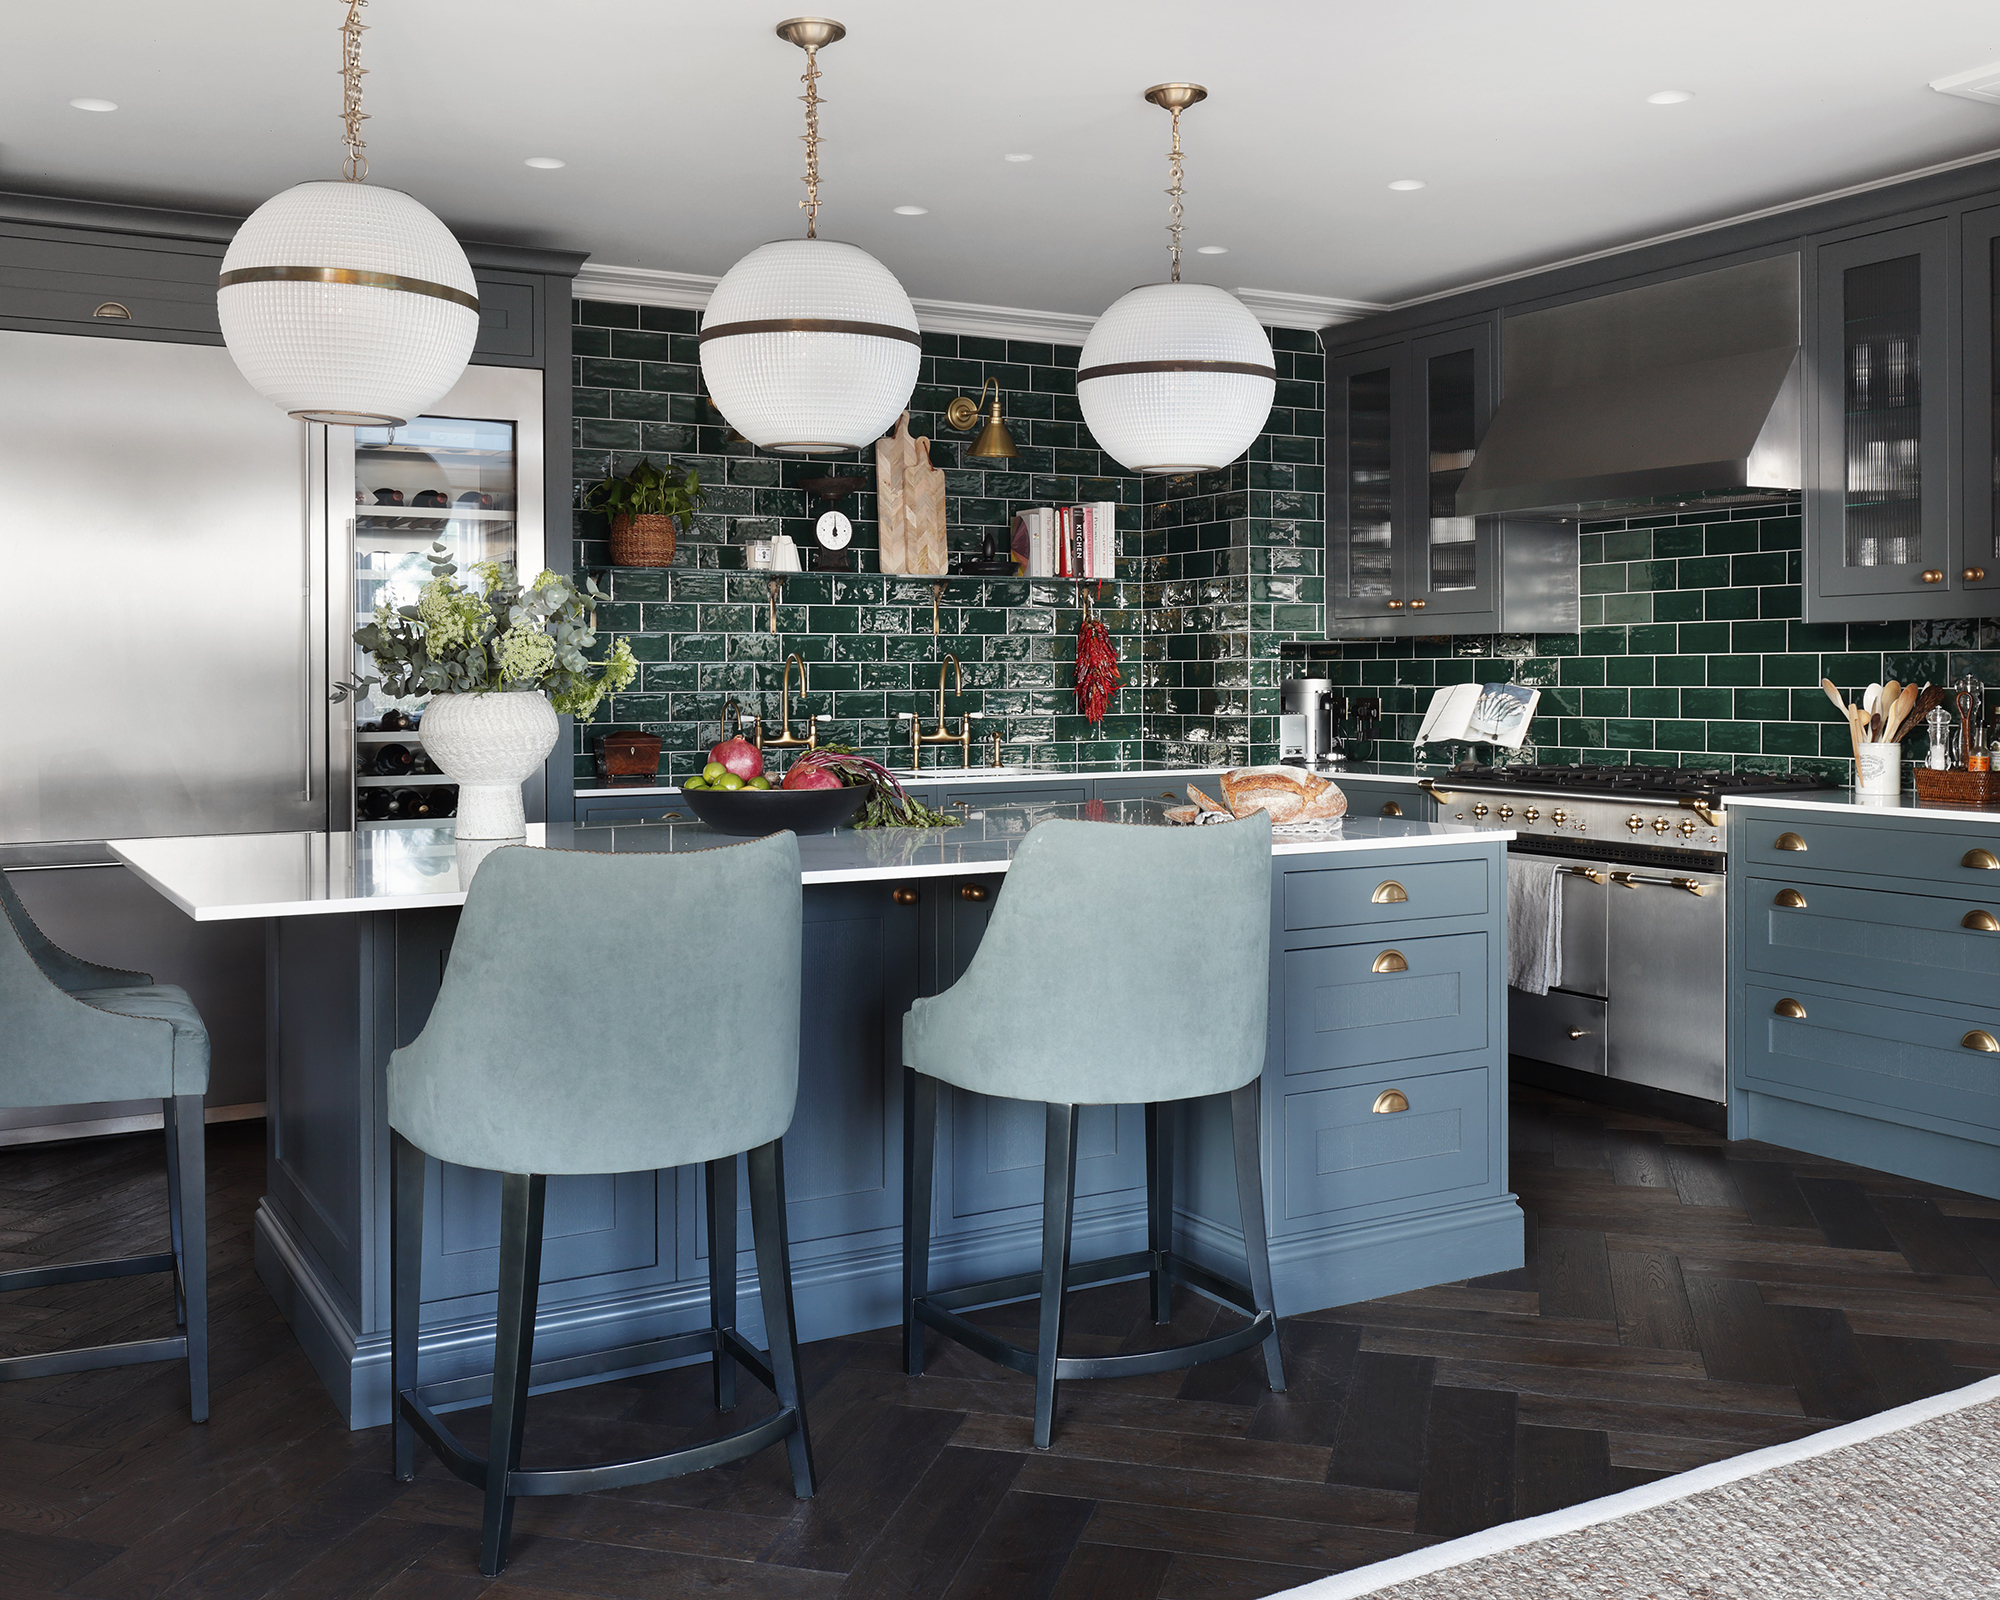 Kitchen with blue colored cabinets, dark green subway tiles and statement round pendant lighting.